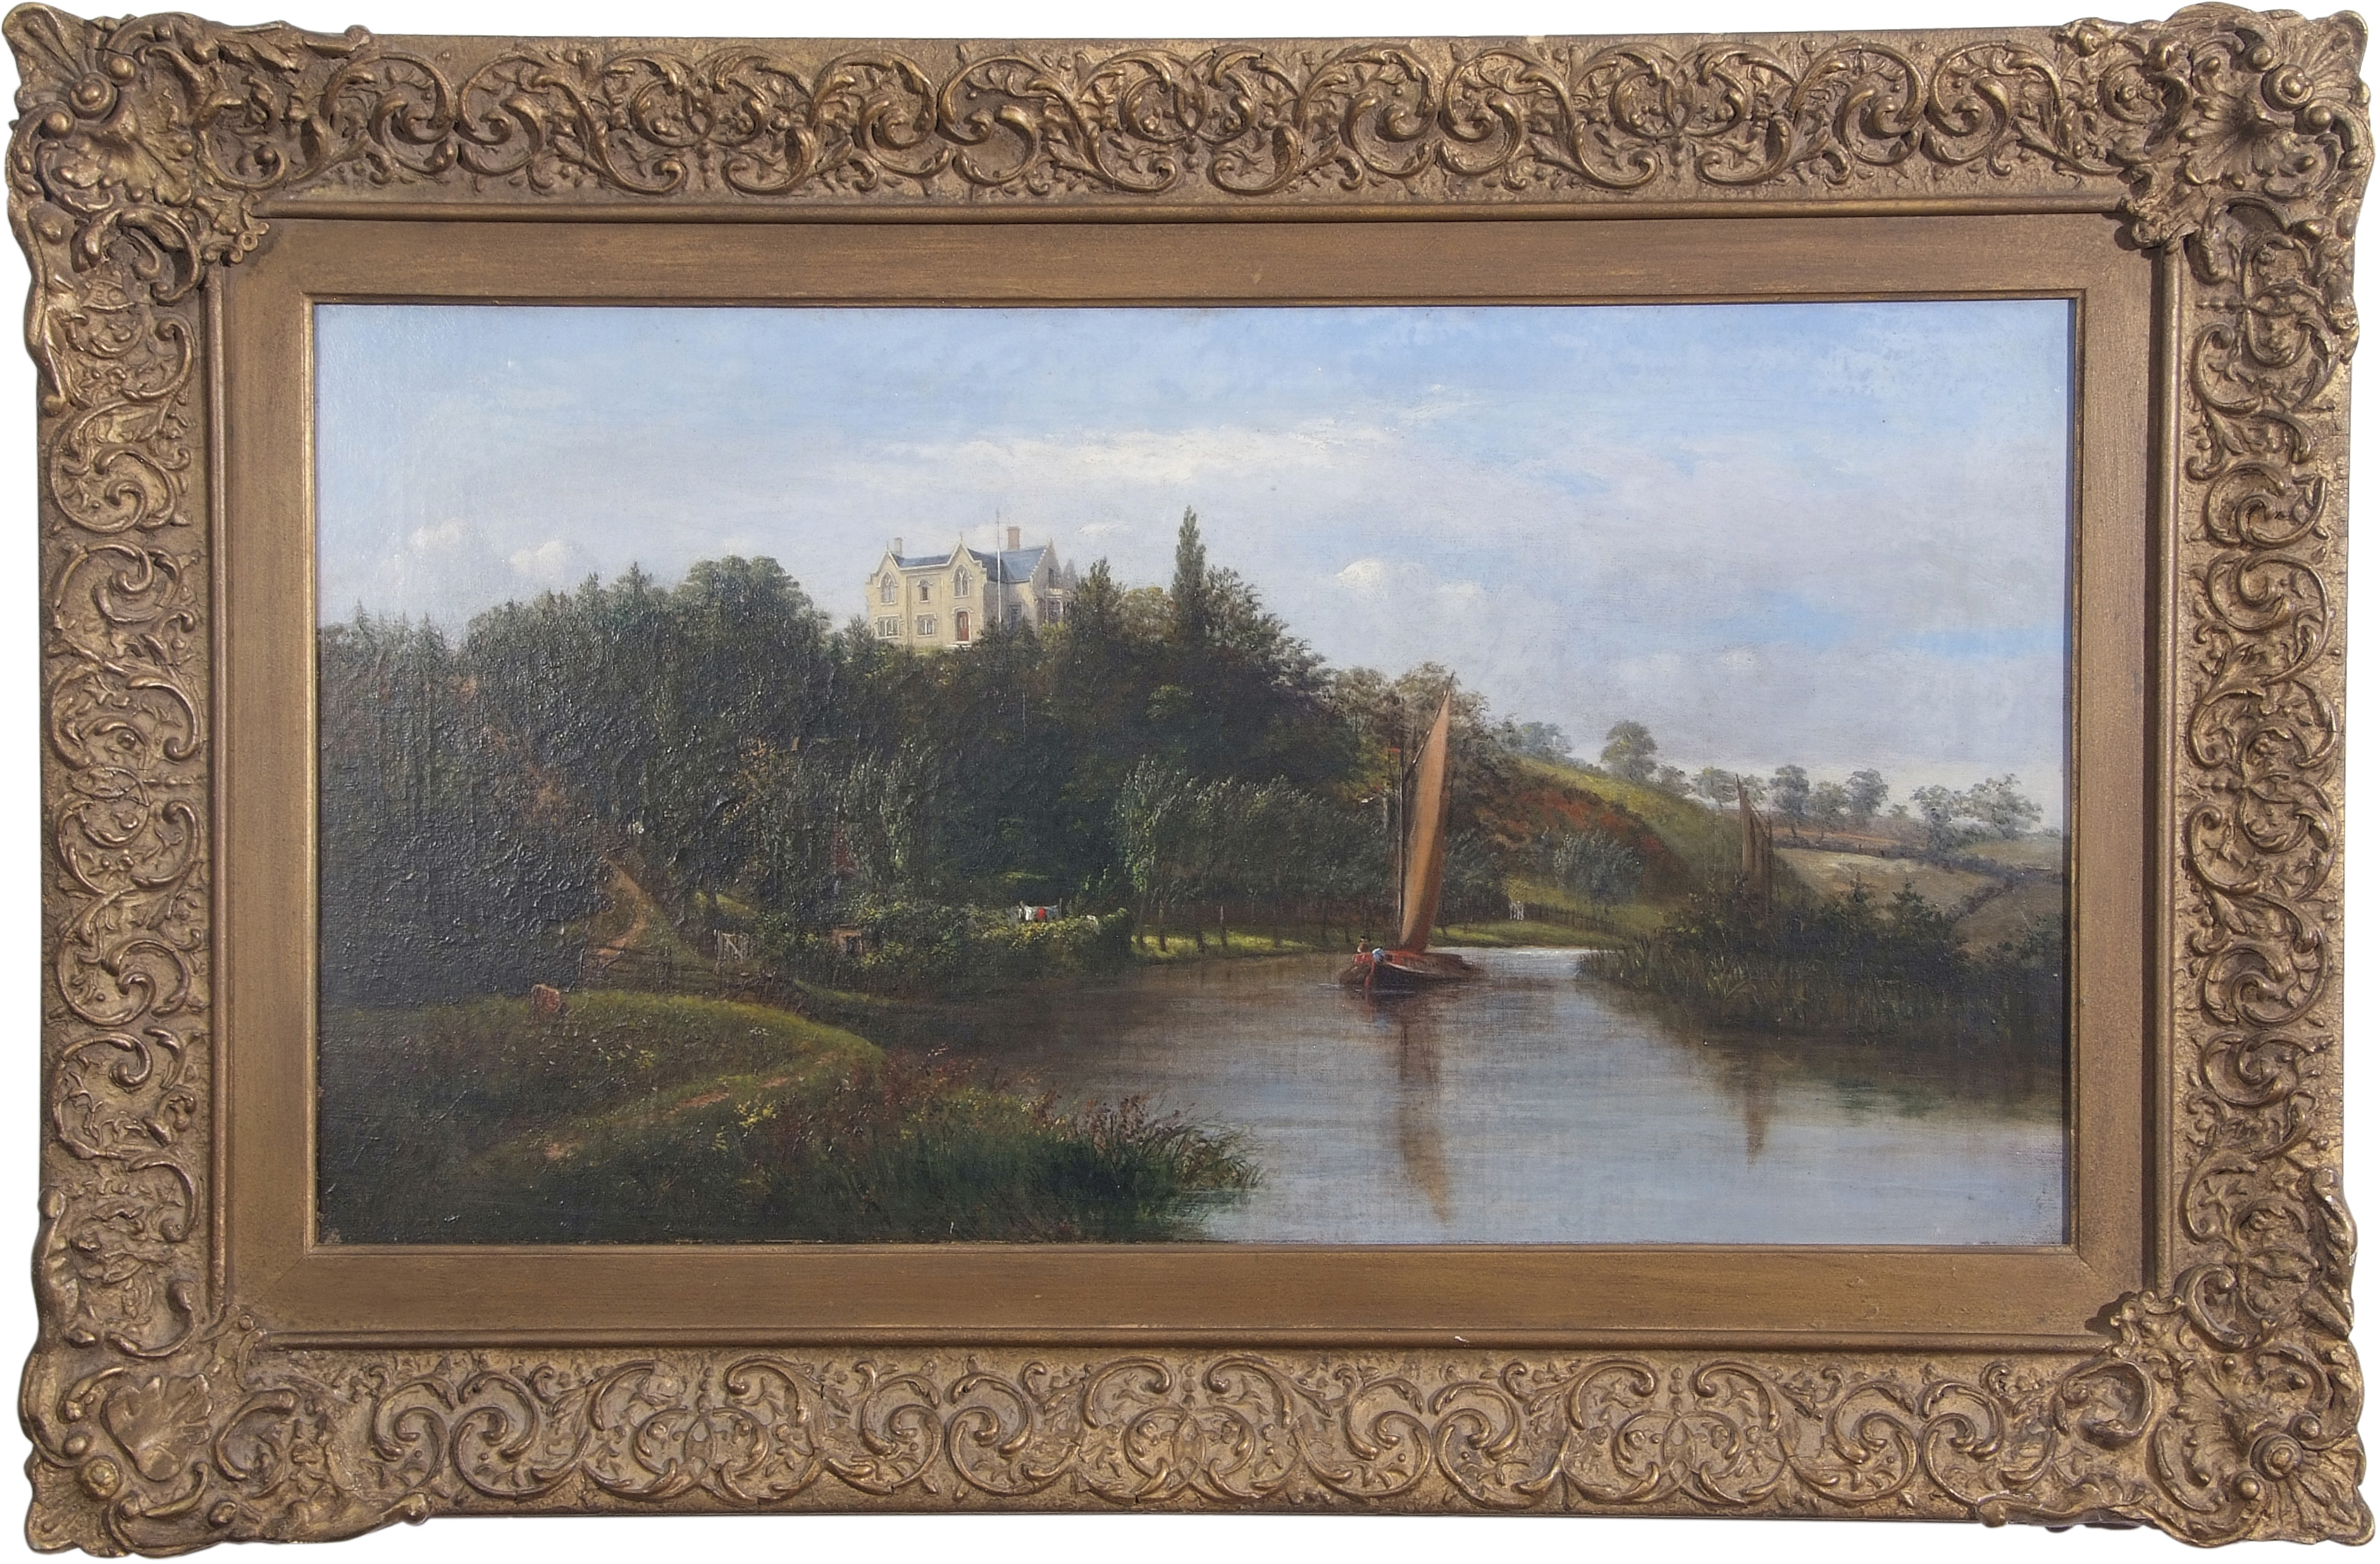 Victoria Colkett (19th century), "Hill House, Bramerton", oil on canvas, signed and inscribed with